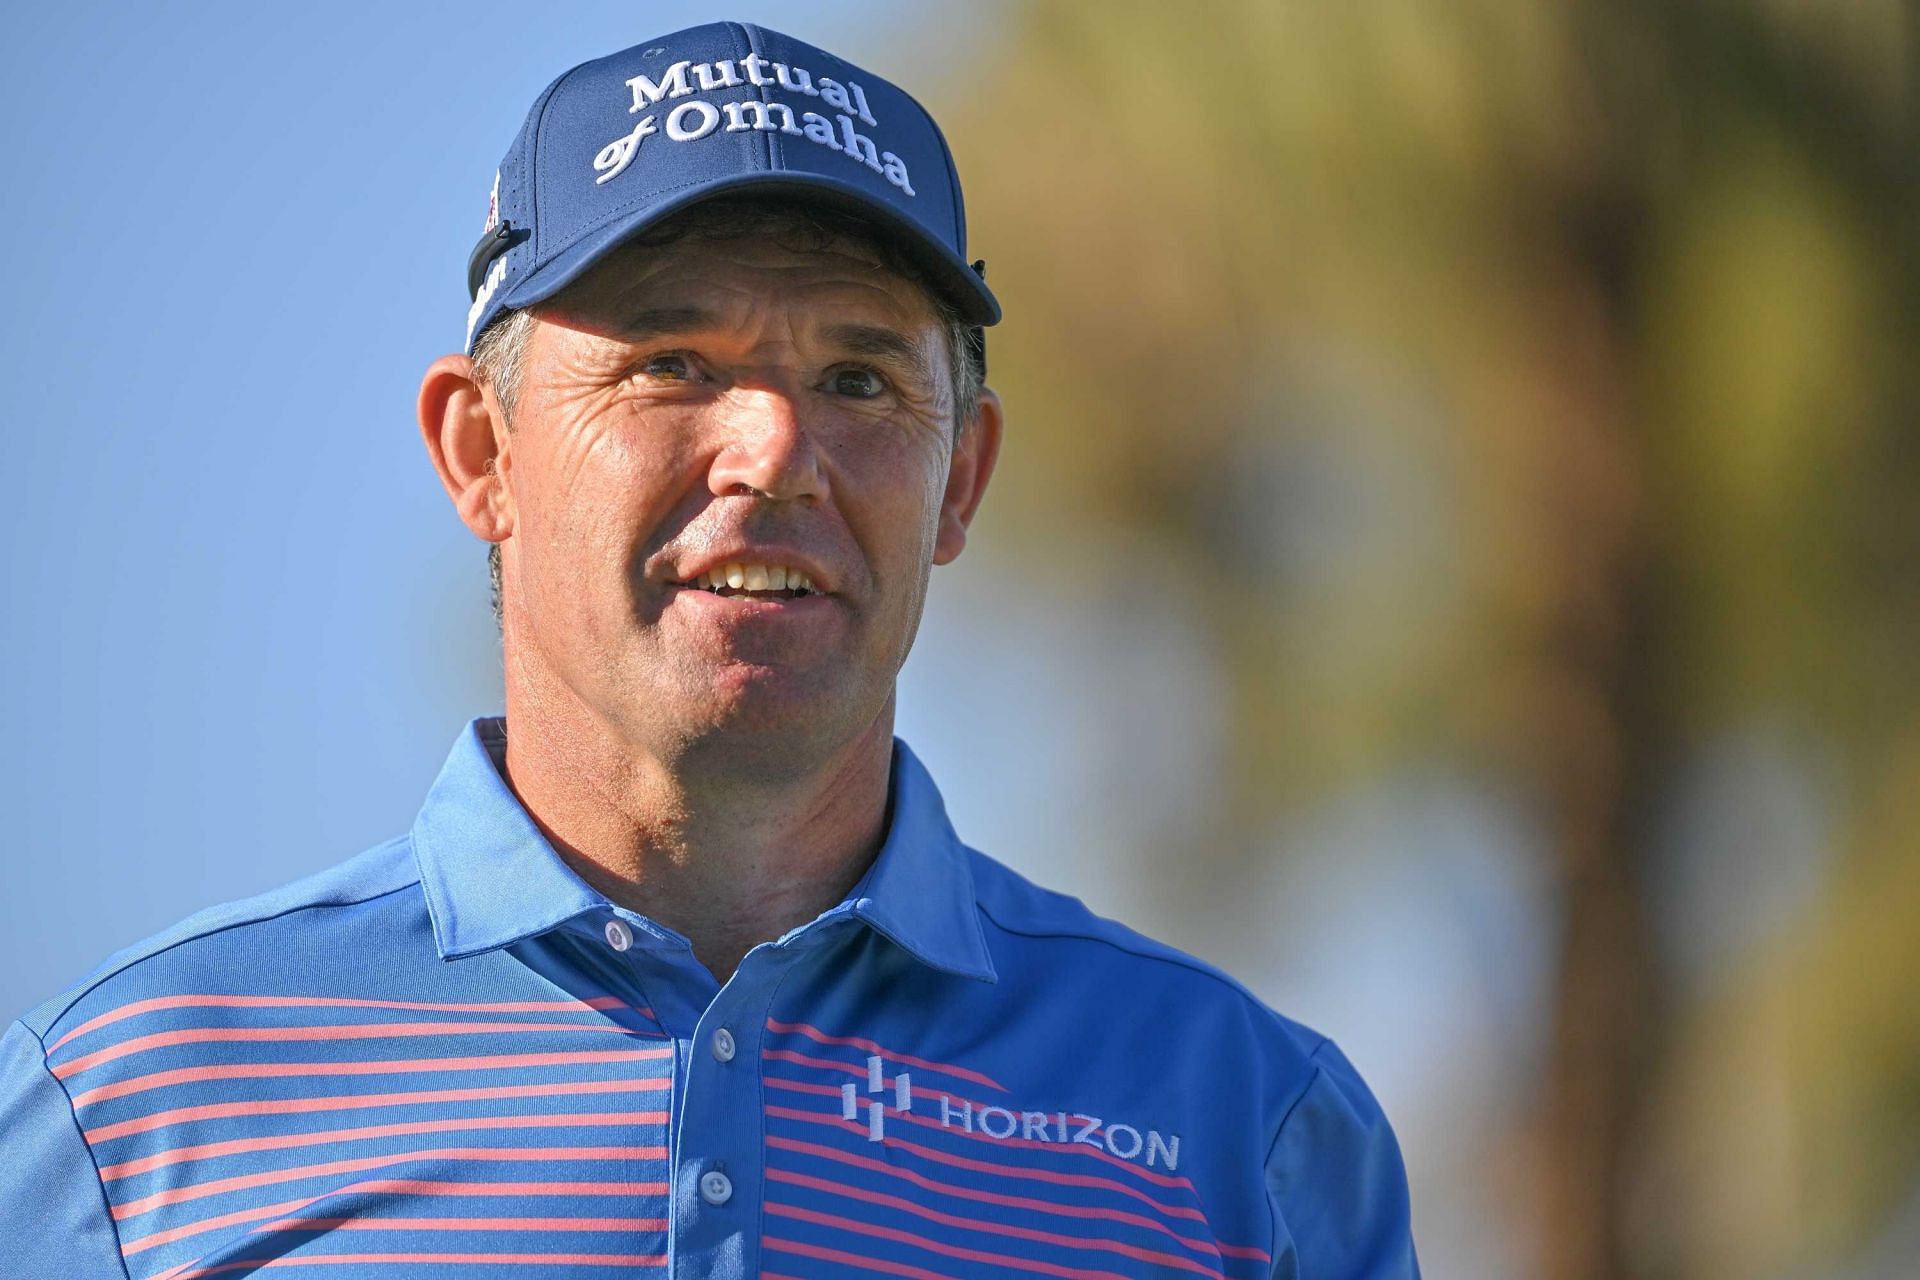 Padraig Harrington will compete in the Arnold Palmer Invitational this week